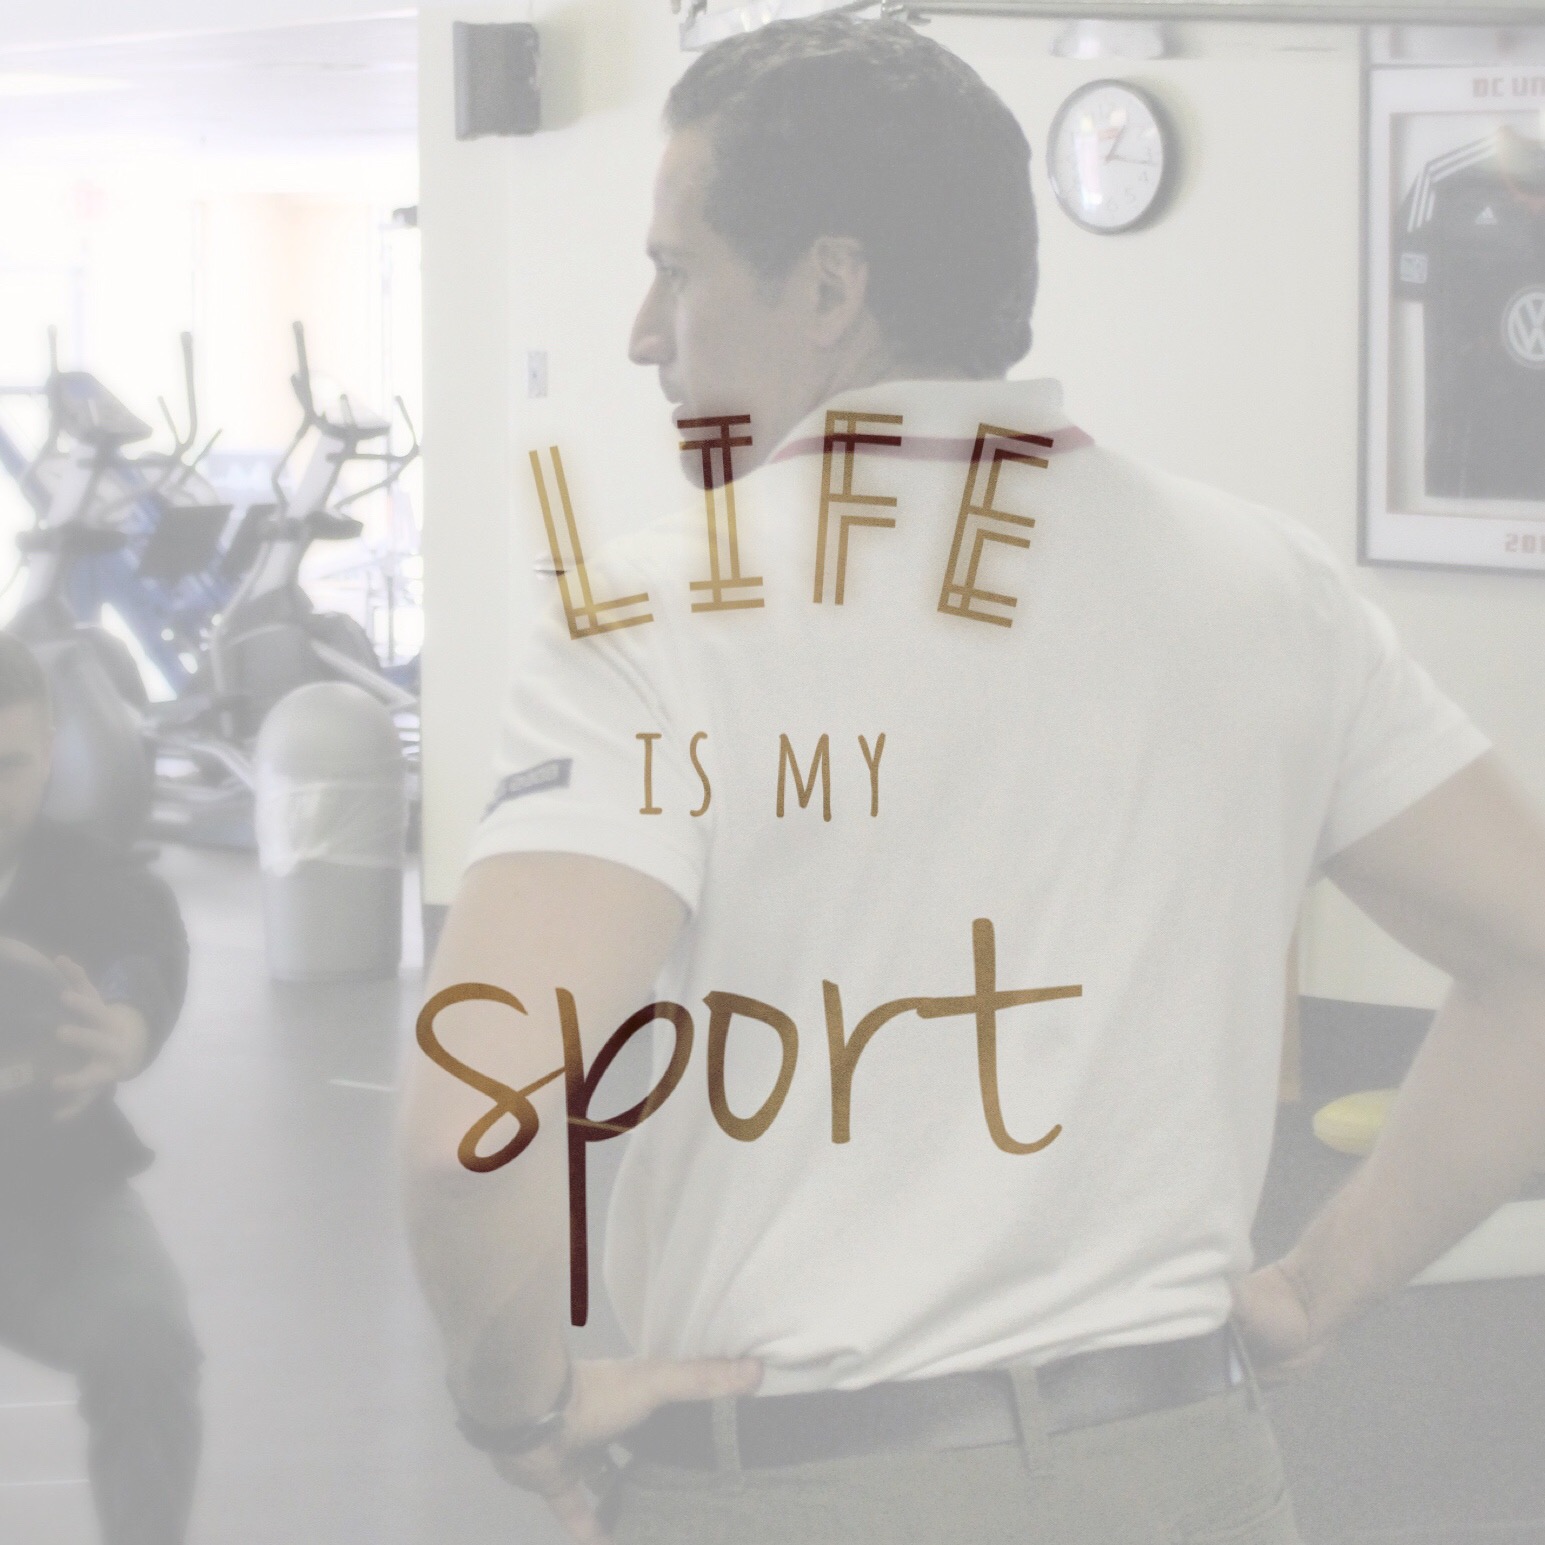 9. Life Is My Sport